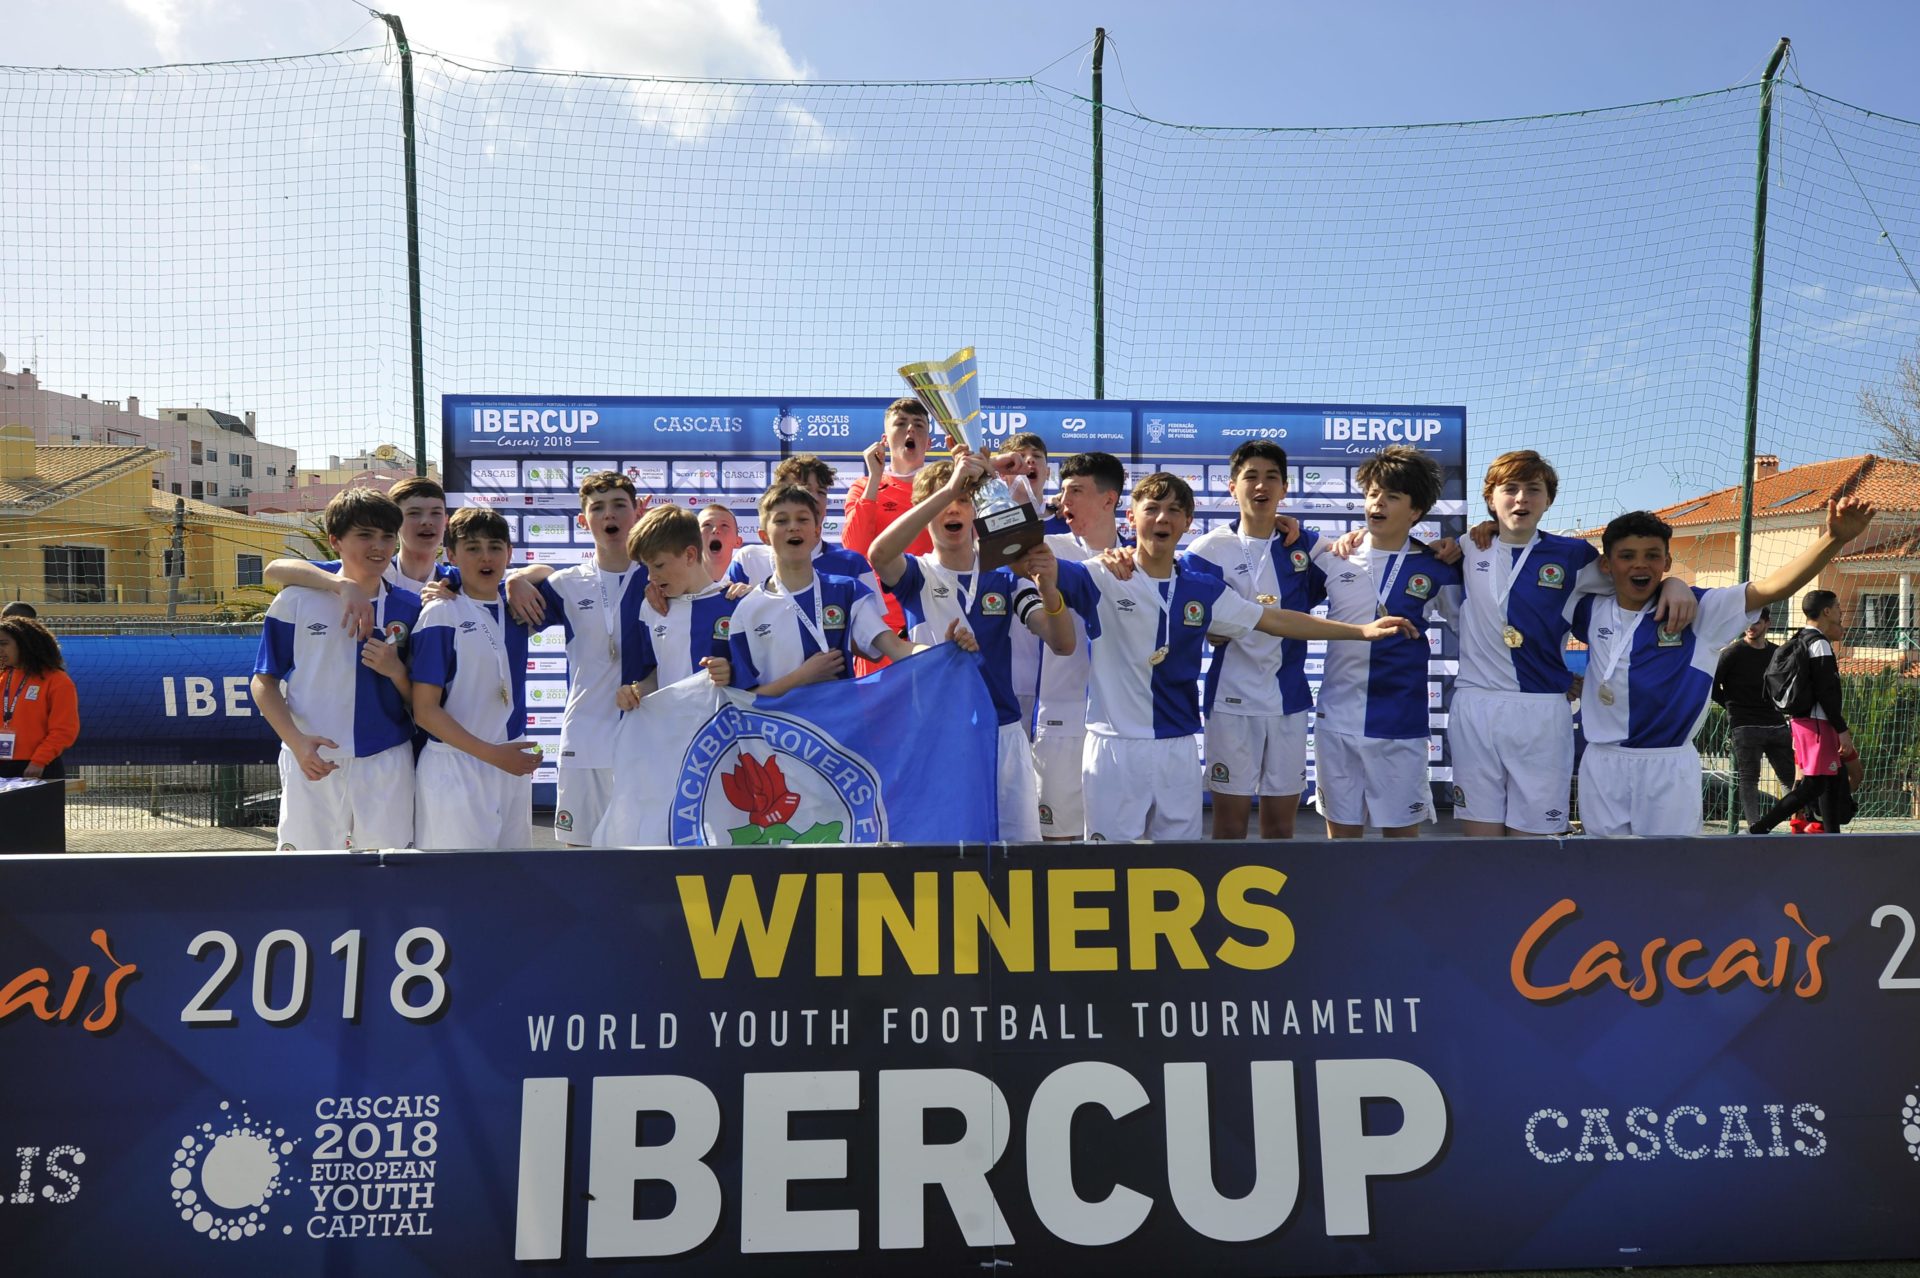 IberCup Cascais - the winners with the cup - Road to Sport